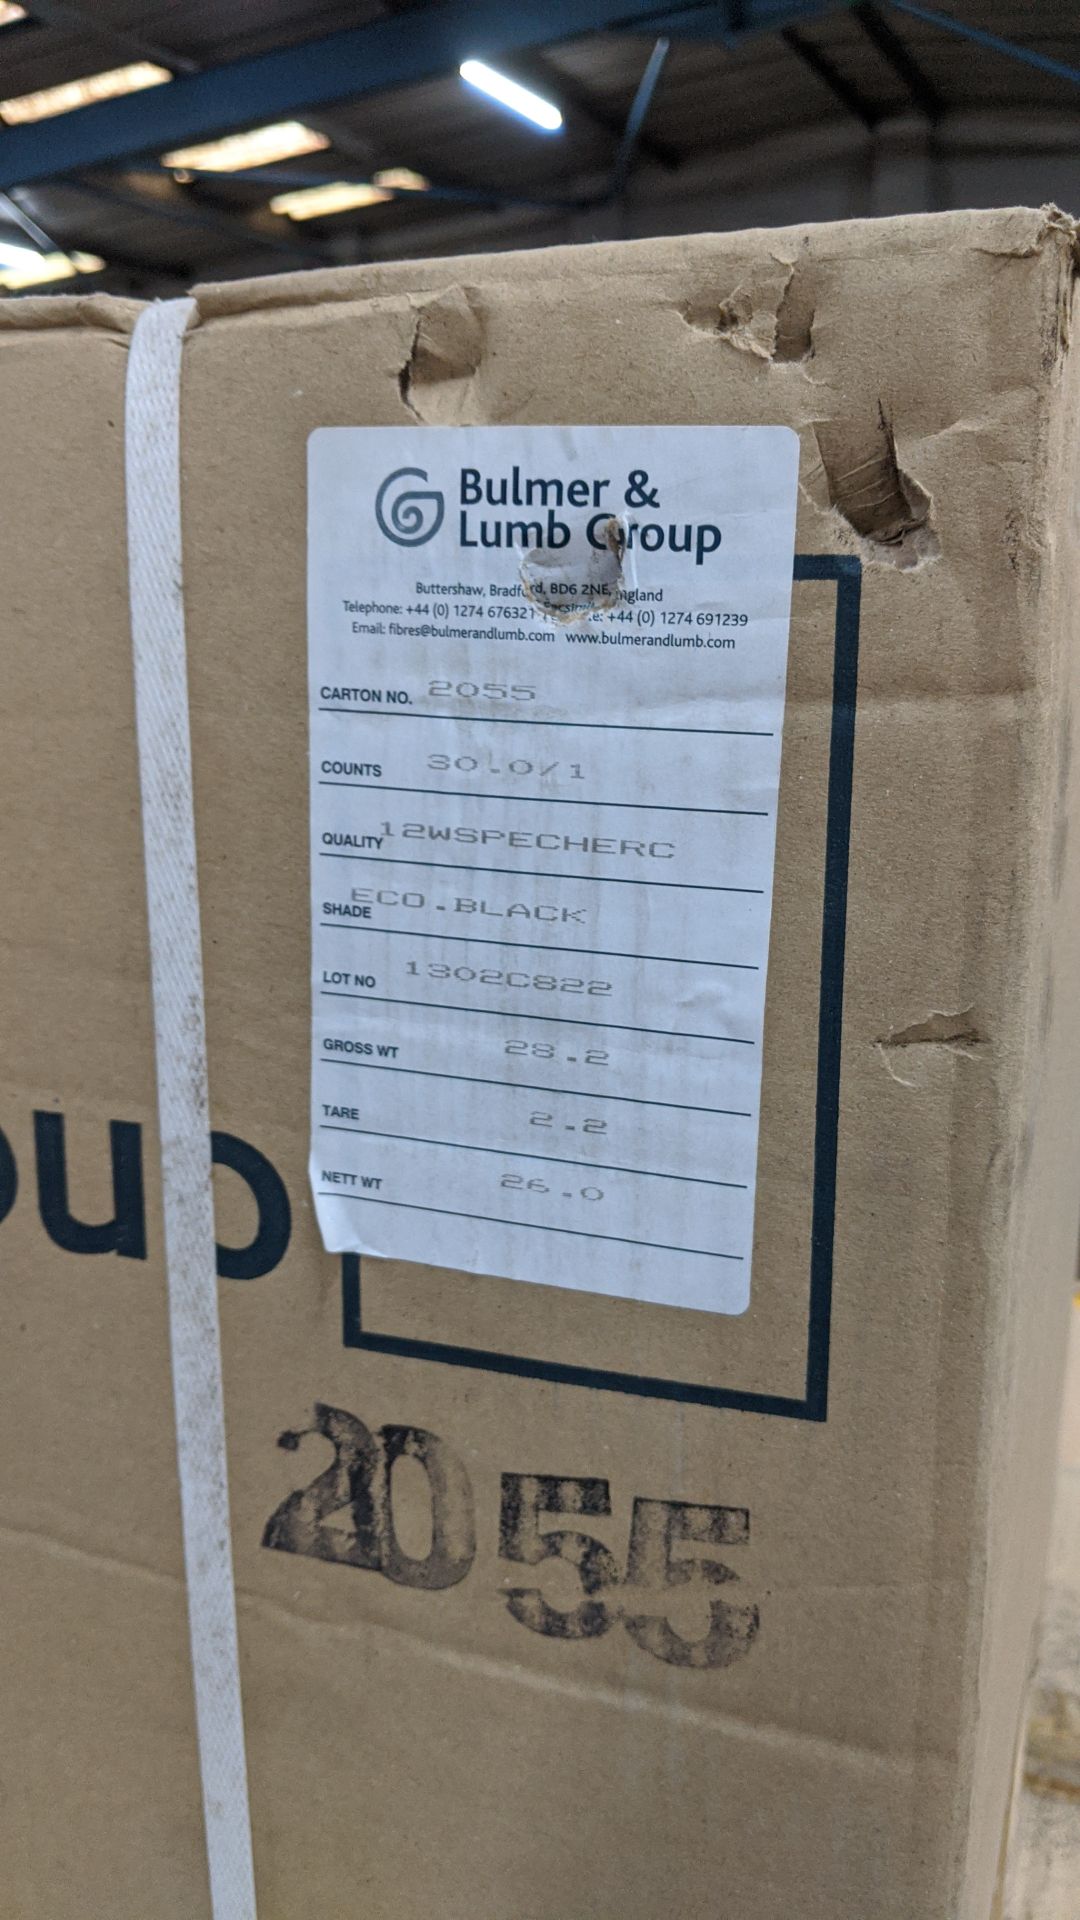 9 boxes of Bulmer & Lumb Group yarn, colour Eco.Black - see photos of labels on boxes for full - Image 3 of 9